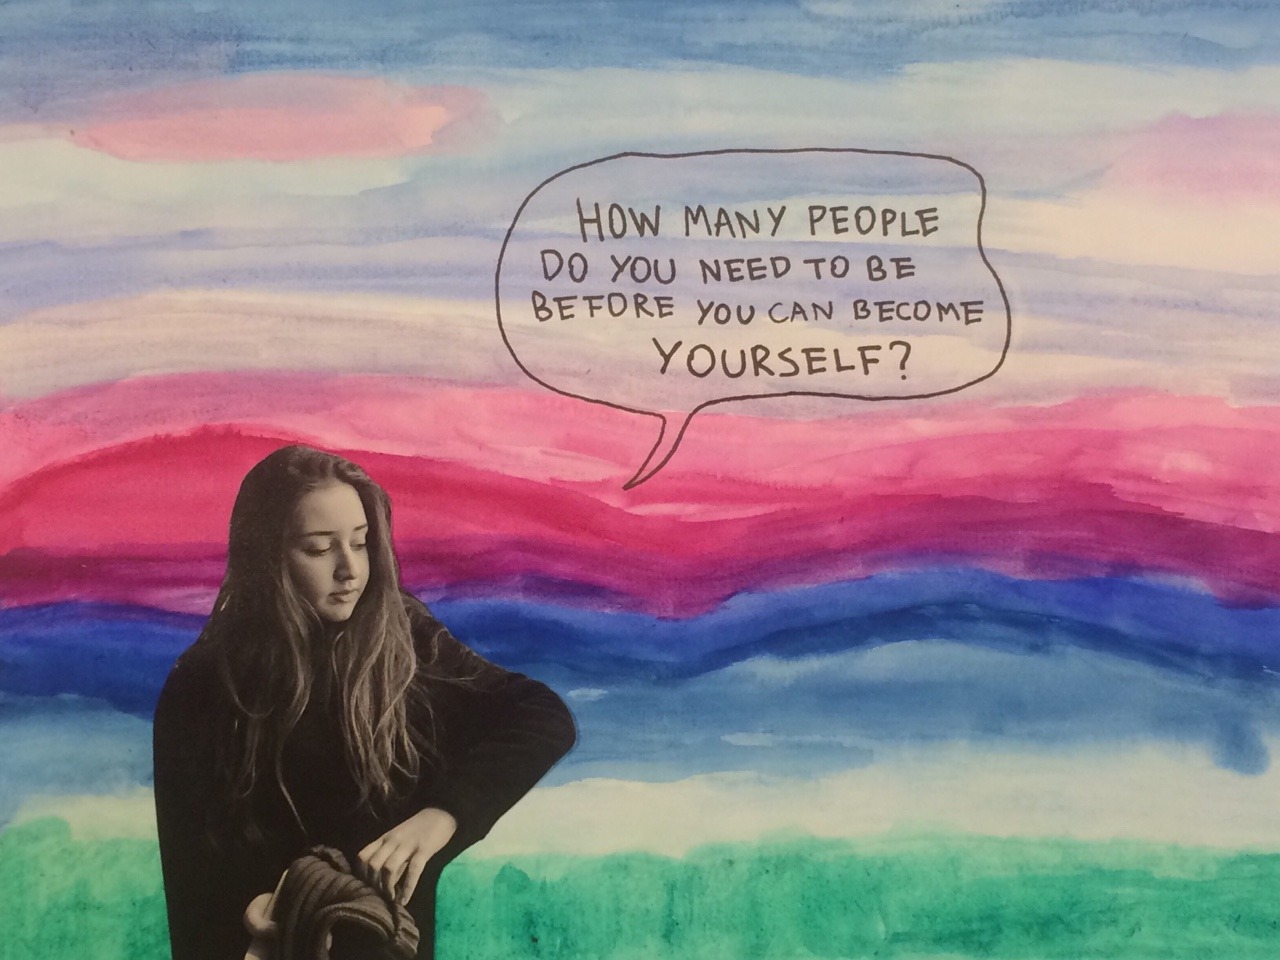 stoicmike:
“ 4amthhoughts:
“ Inspired by Michael Lipsey
”
I rarely reblog, but I like this epigram collage by Nutsa from the country (not the U.S. state) of Georgia. In 500 years it might be attributed School of Lipsey. – Michael Lipsey
”
Before we...